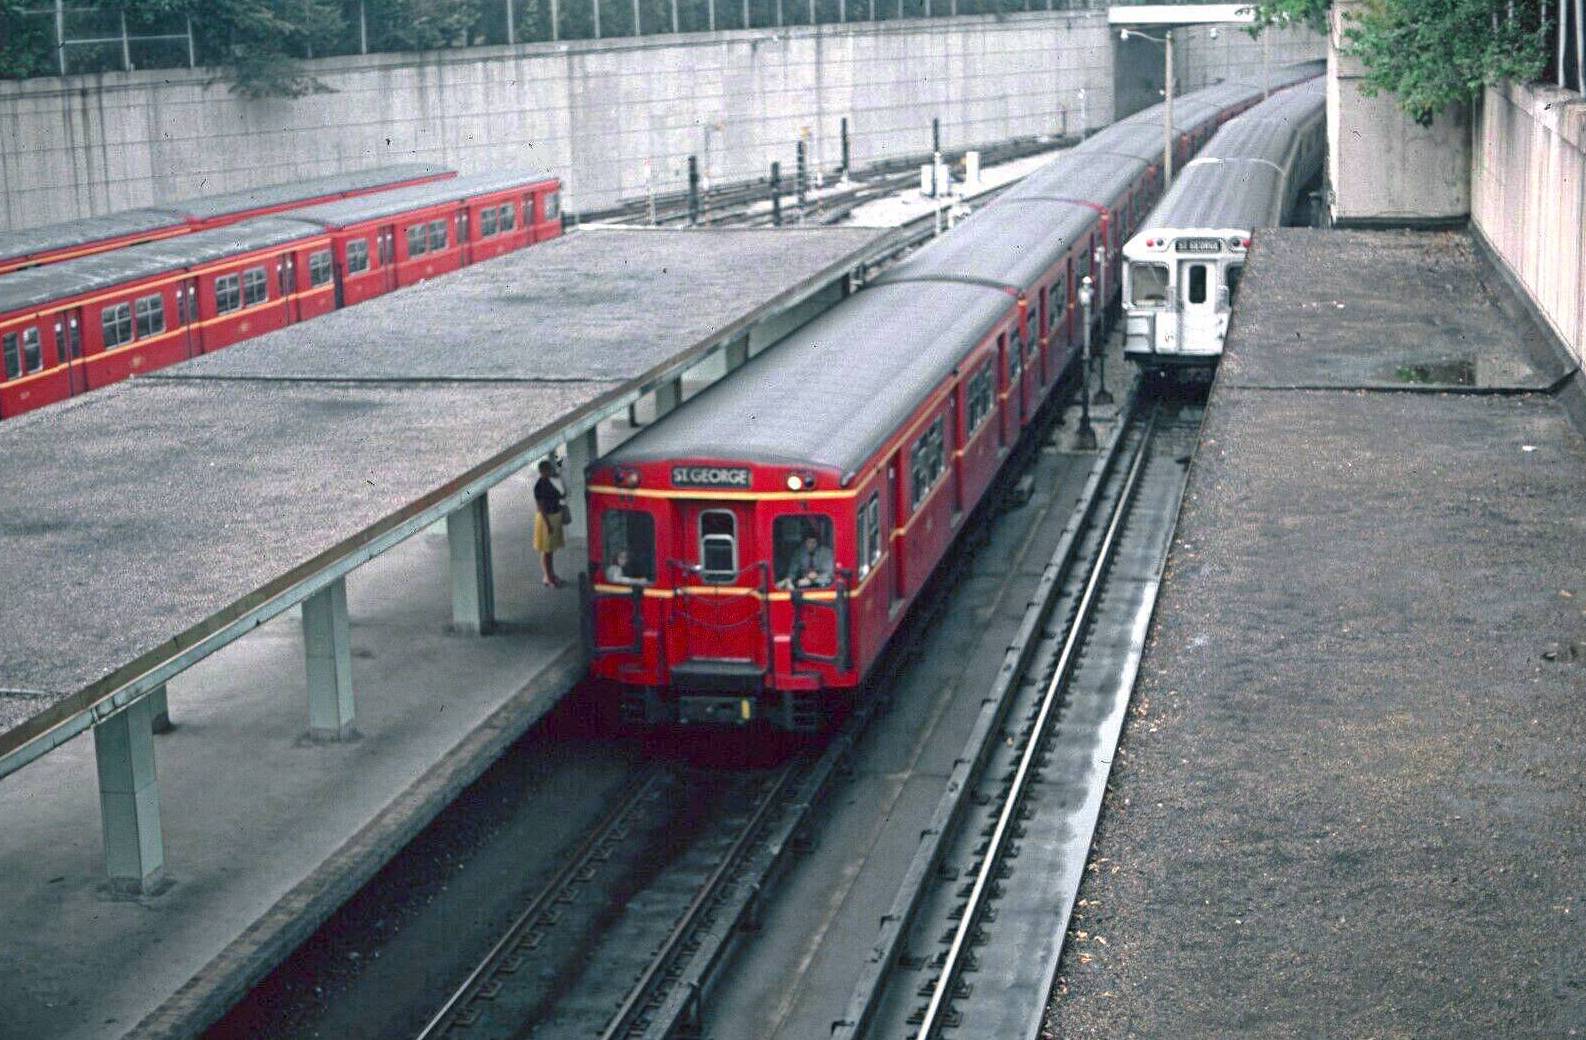 PHOTO - TORONTO - TTC YONGE STREET SUBWAY - DAVISVILLE STATION - TRAIN PULLING INTO STATION - ANOTHER TRAIN ON RIGHT - TWO TRAINS ON SIDING - ORIGINAL GLOUCESTER CARS BUILT IN ENGLAND - AERIAL LOOKING N - 1976